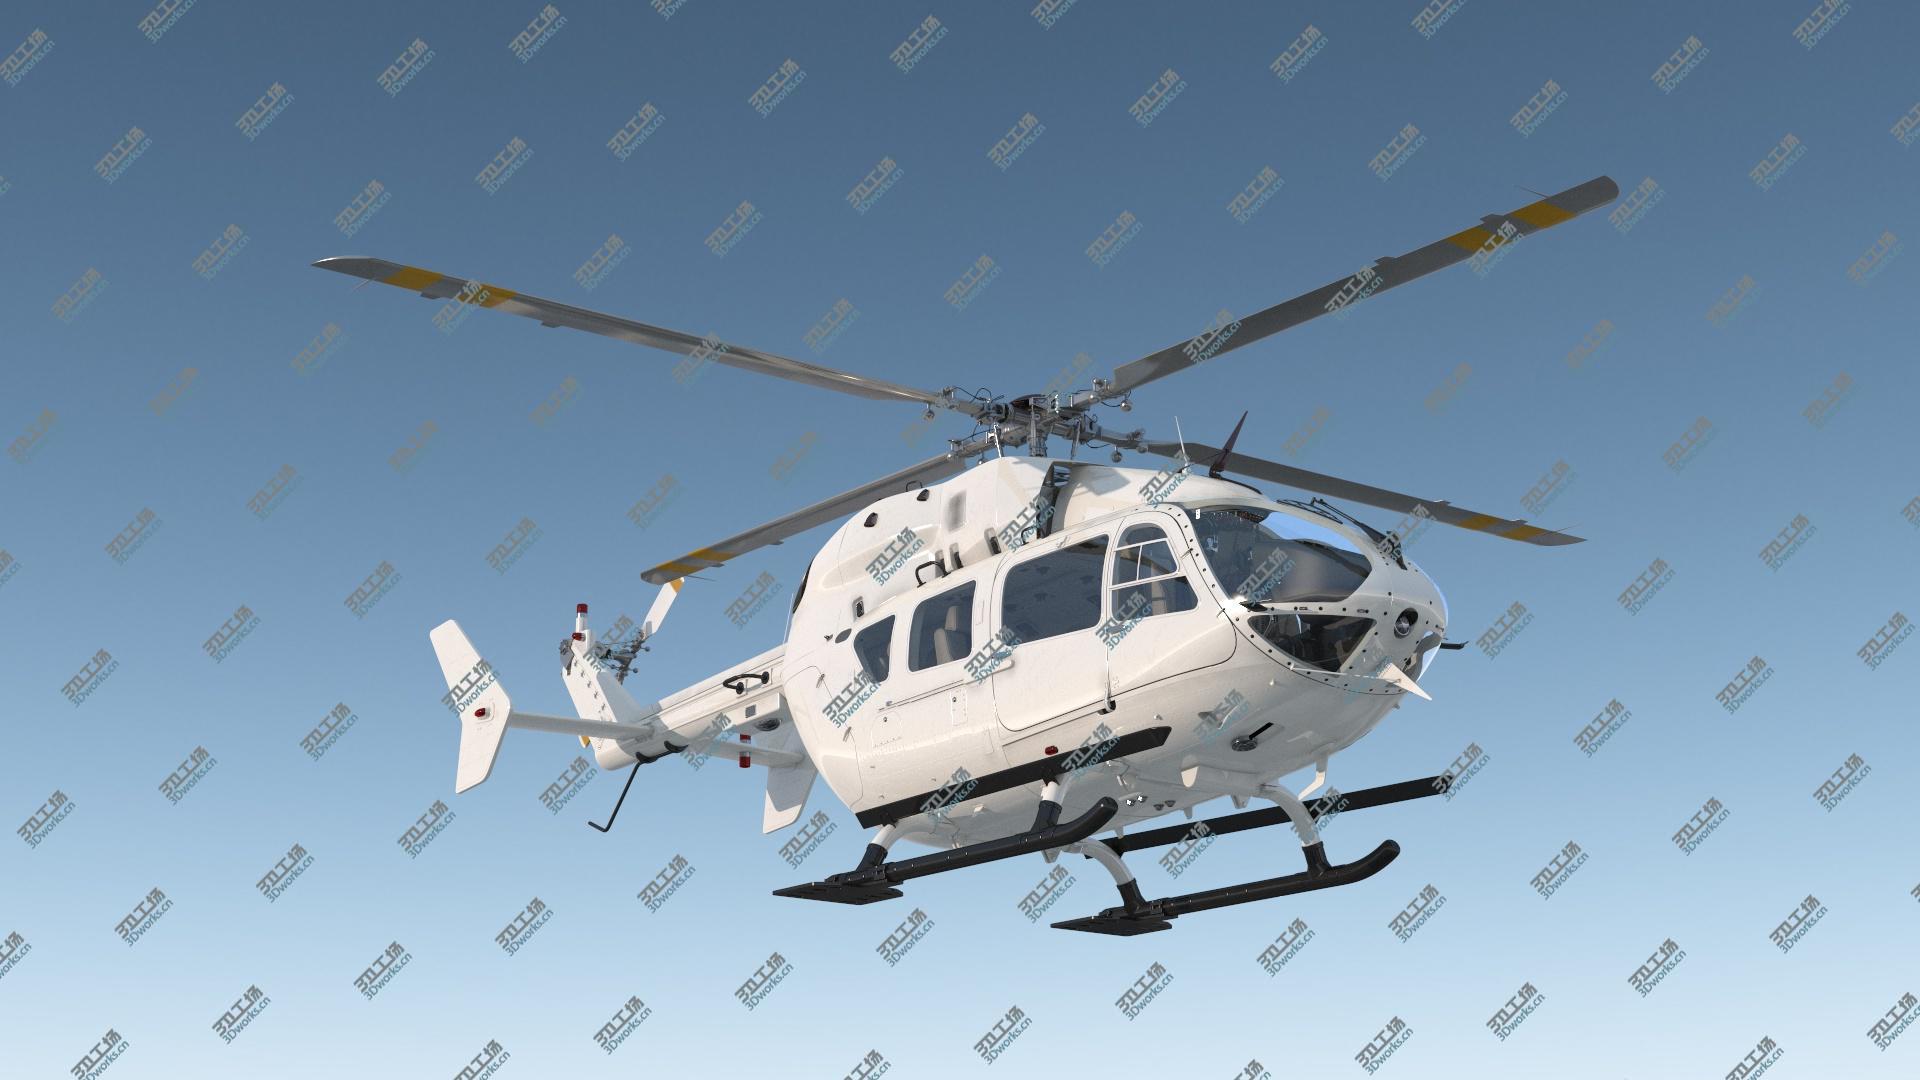 images/goods_img/20210319/3D Twin Engine Light Utility Helicopter/3.jpg